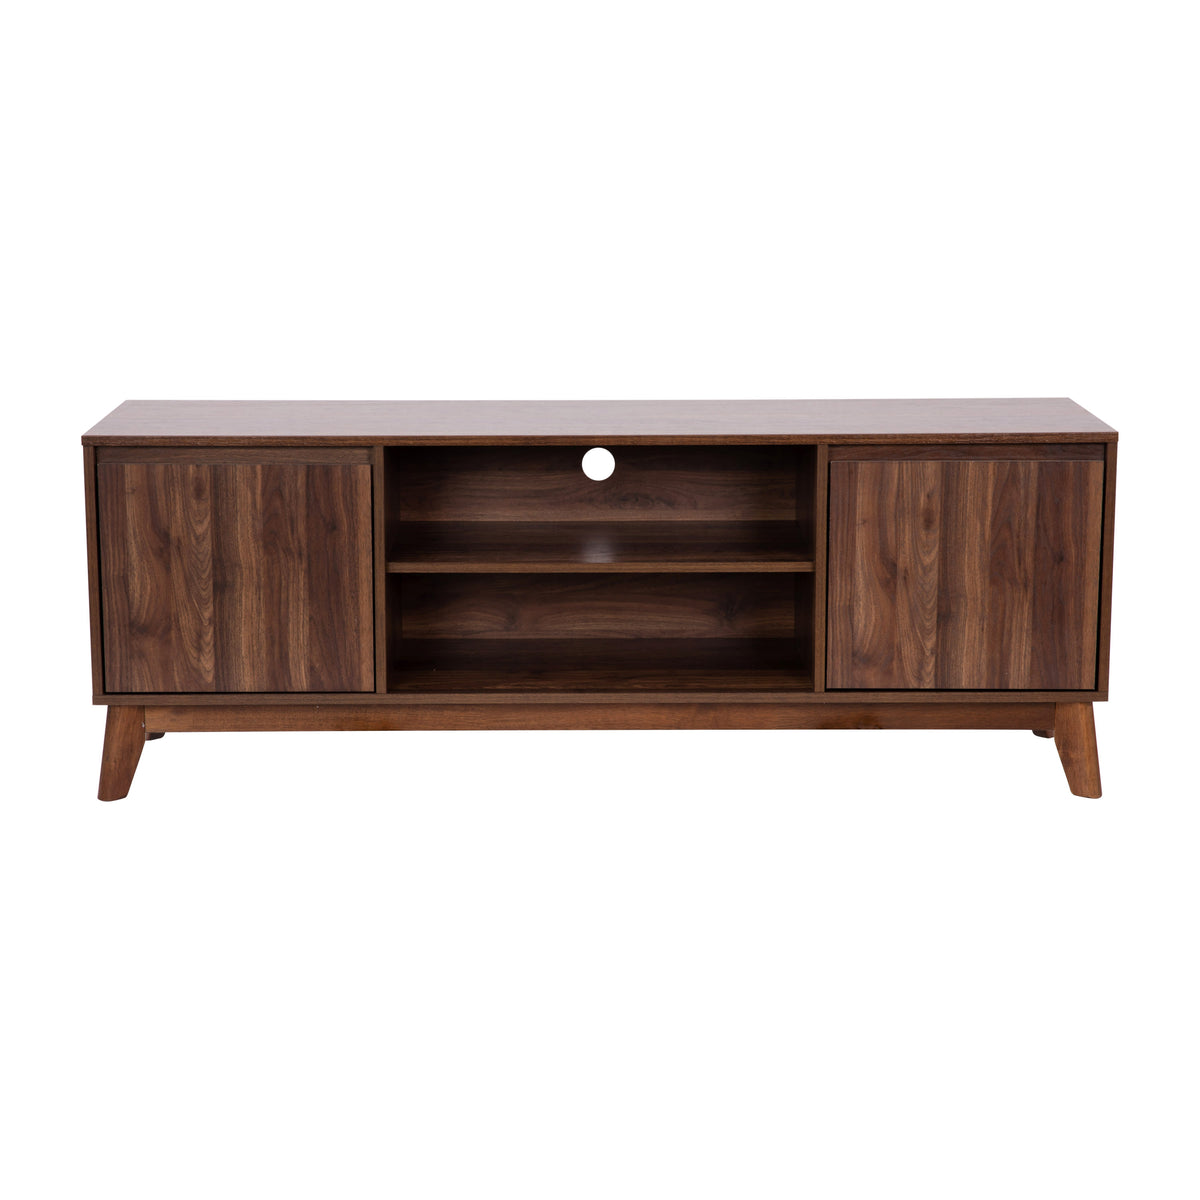 59" |#| Walnut 60" TV Stand with Adjustable Middle Shelf - Dual Soft Close Storage Doors